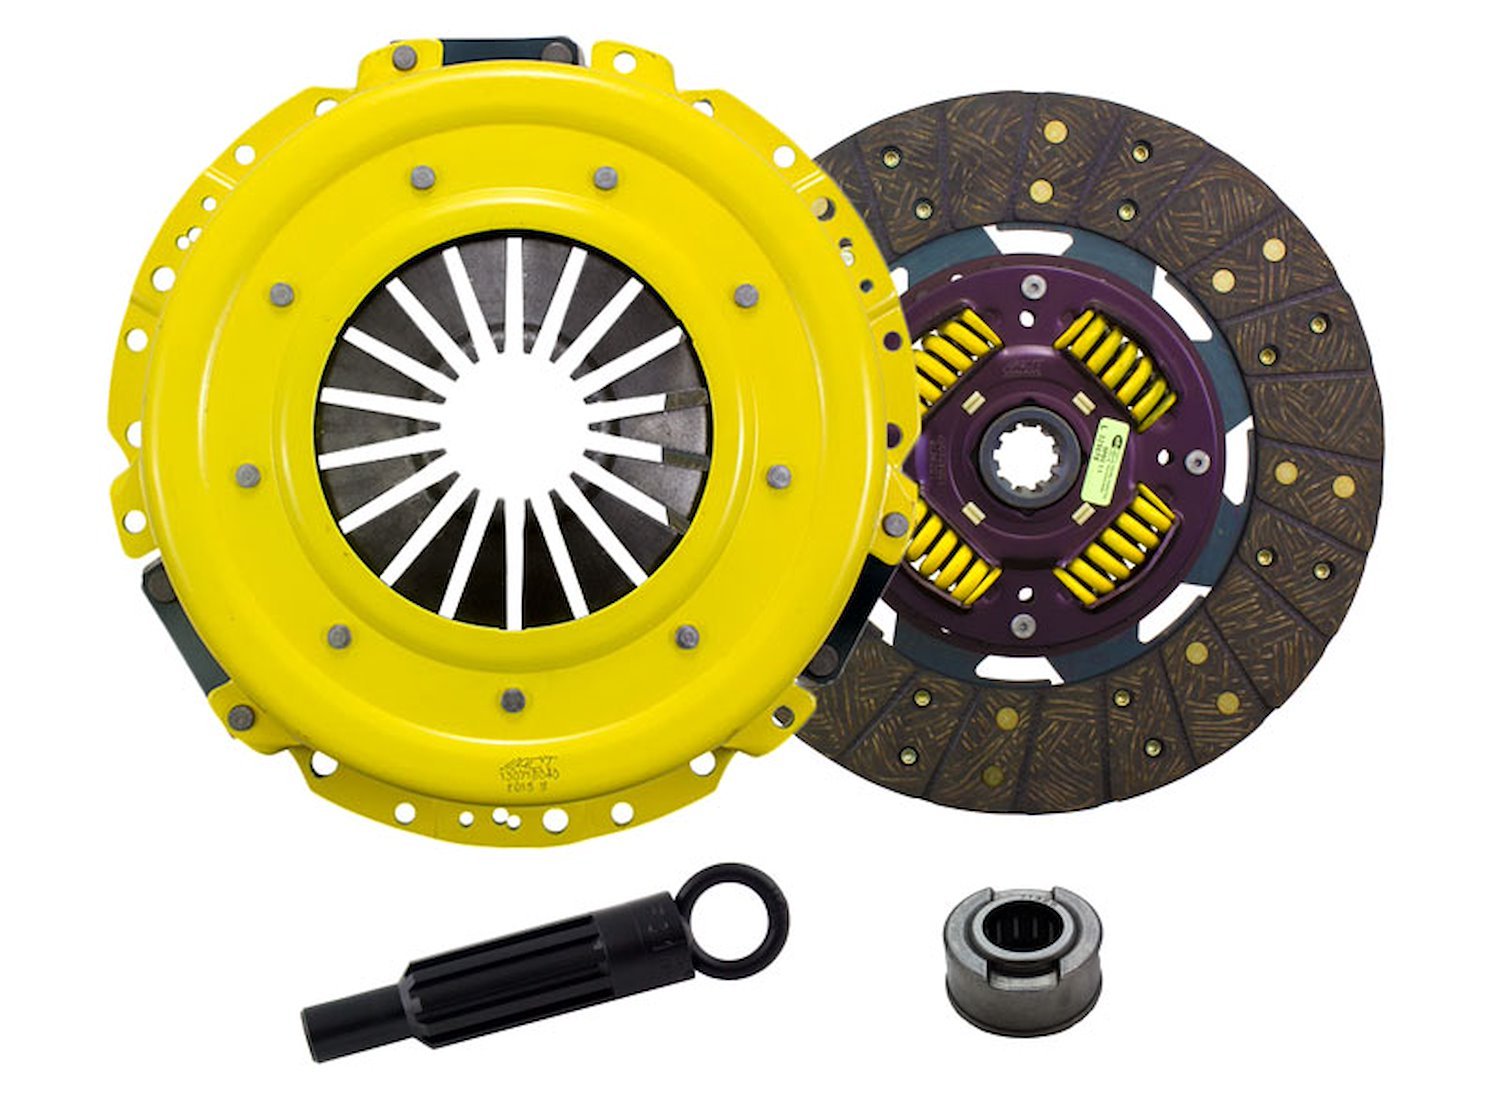 Sport/Performance Street Sprung Transmission Clutch Kit Fits Select Ford/Lincoln/Mercury/Mazda